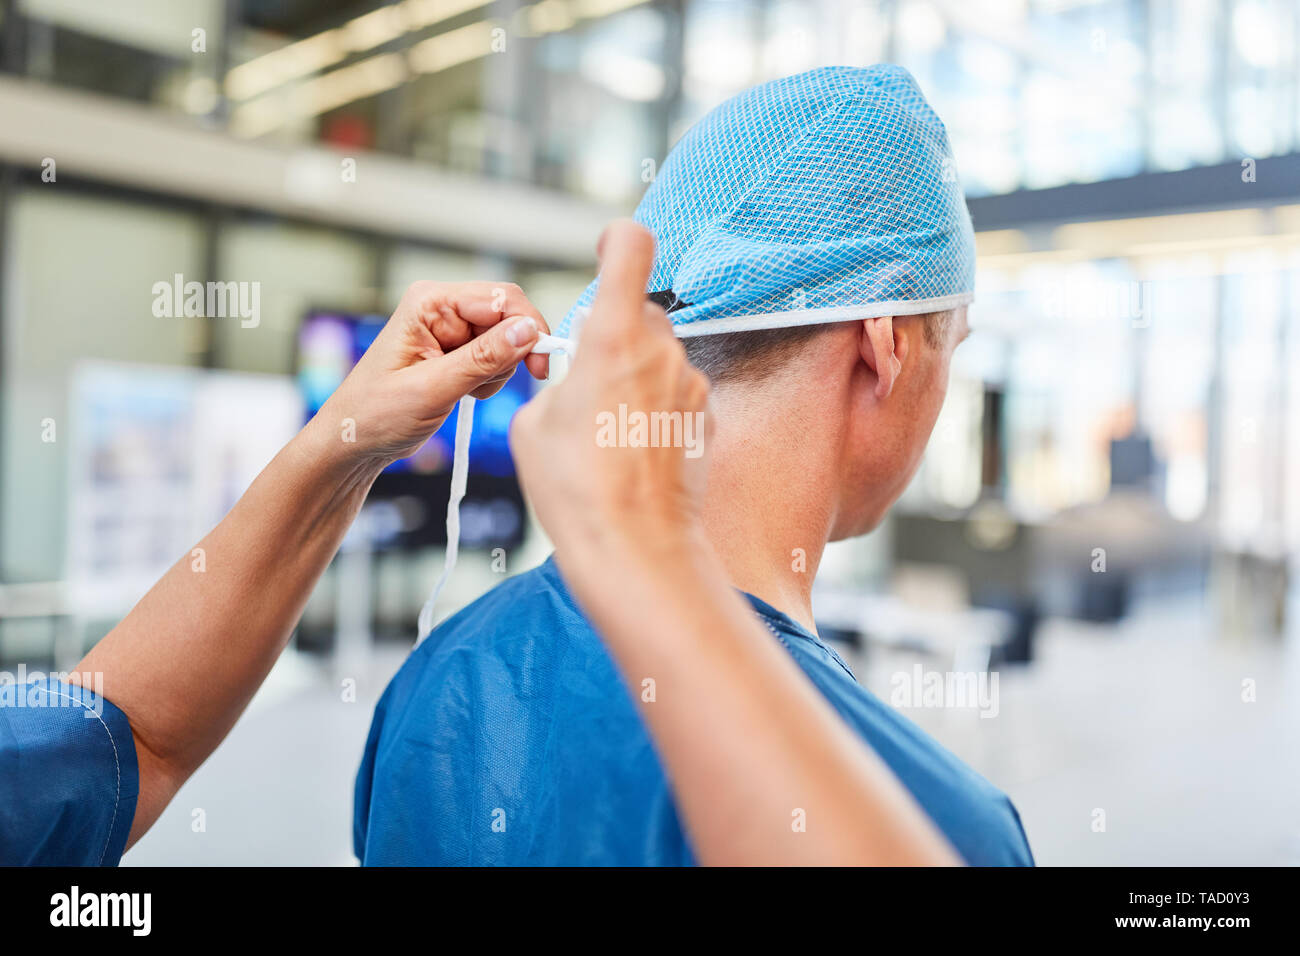 Doctor in the emergency room or intensive care unit with blue hood and surgical clothing Stock Photo